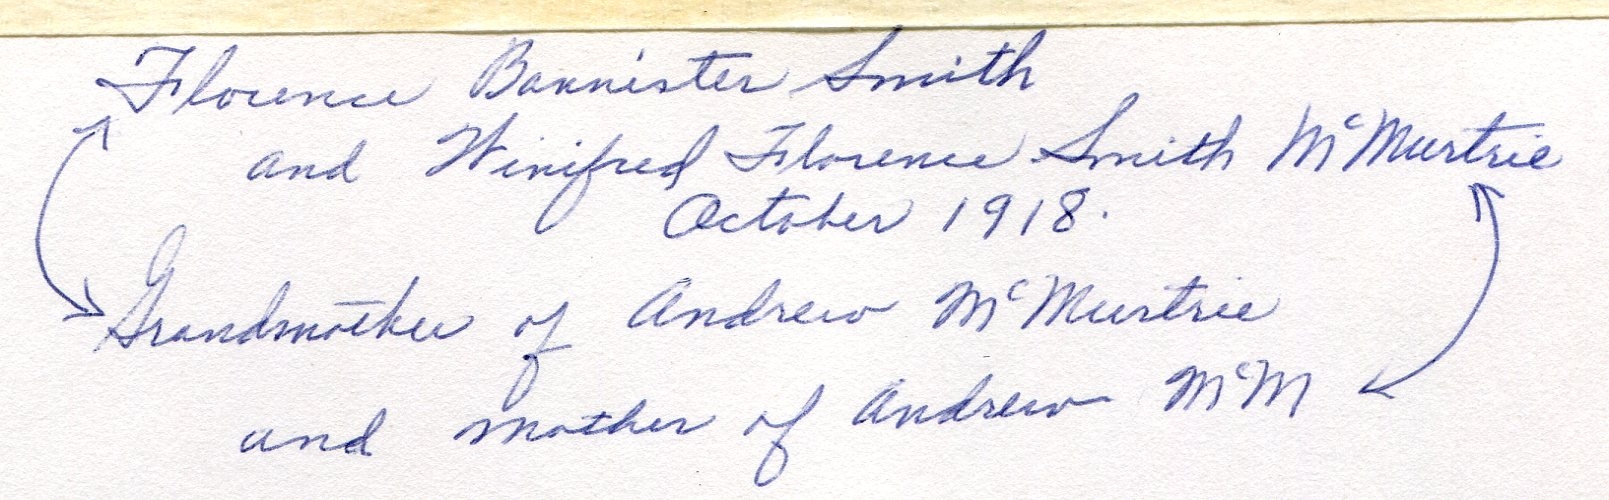 Florence Bannister Smith October 1918